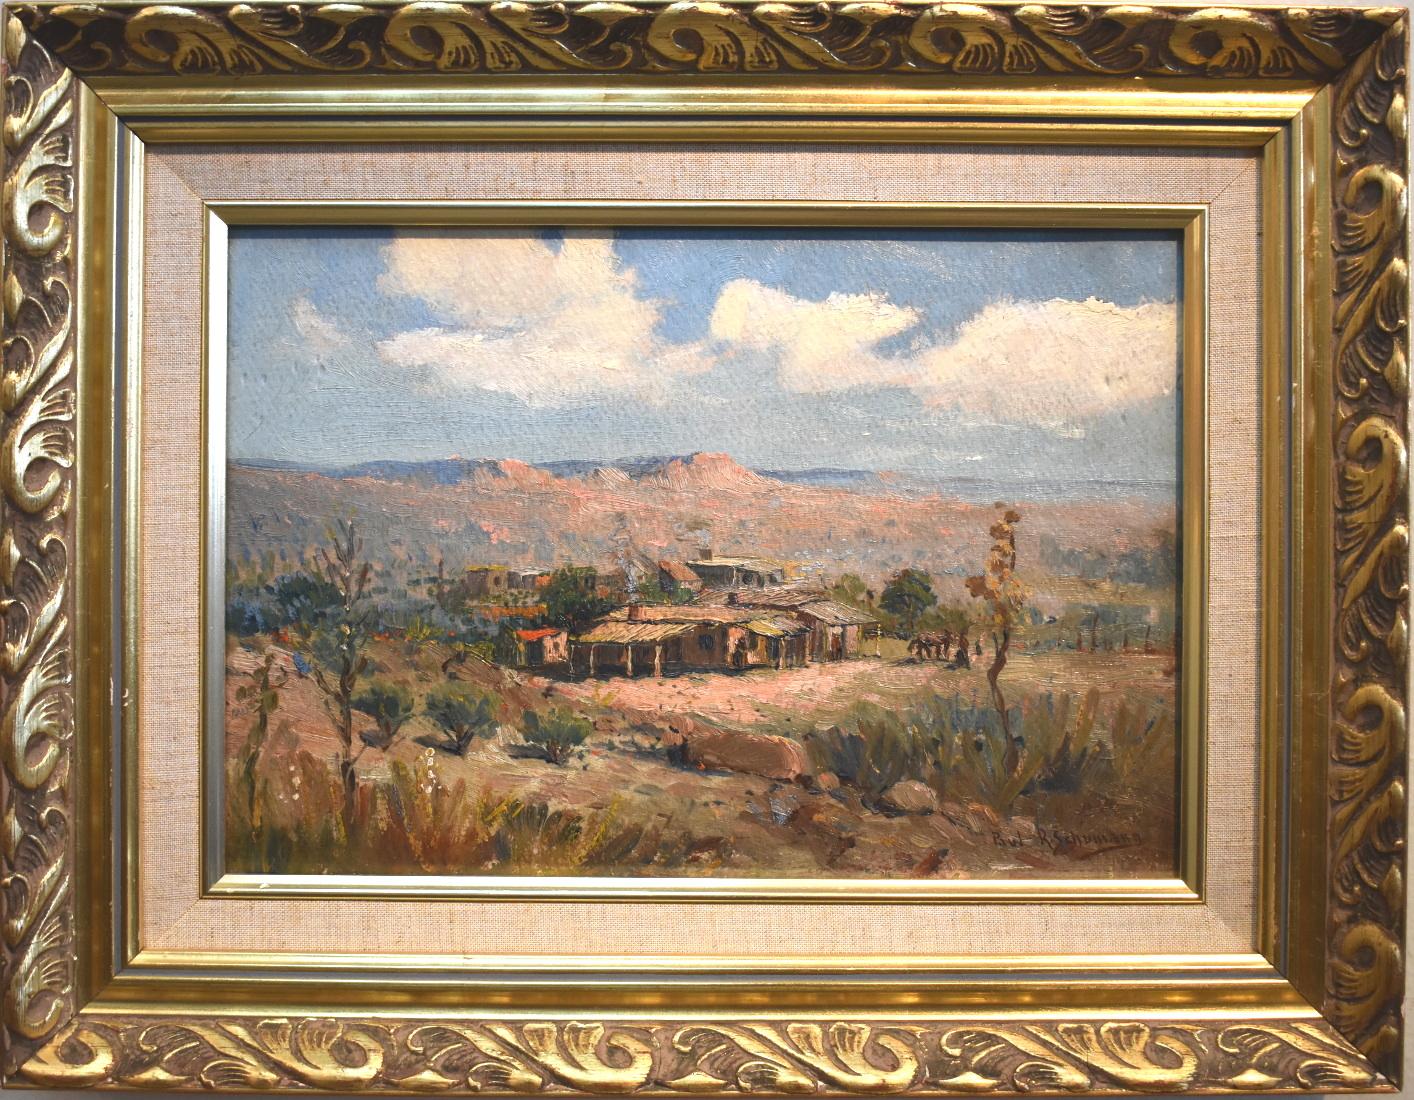 The following two paintings are being offered as a pair.  Only one is signed the other is not.  Both early New Mexico Paintings with beautiful heavy impasto.Paul Schumann 
1876-1946
Galveston Artist
Image Size: 9 x 13.25
Frame Size: 13.75 x